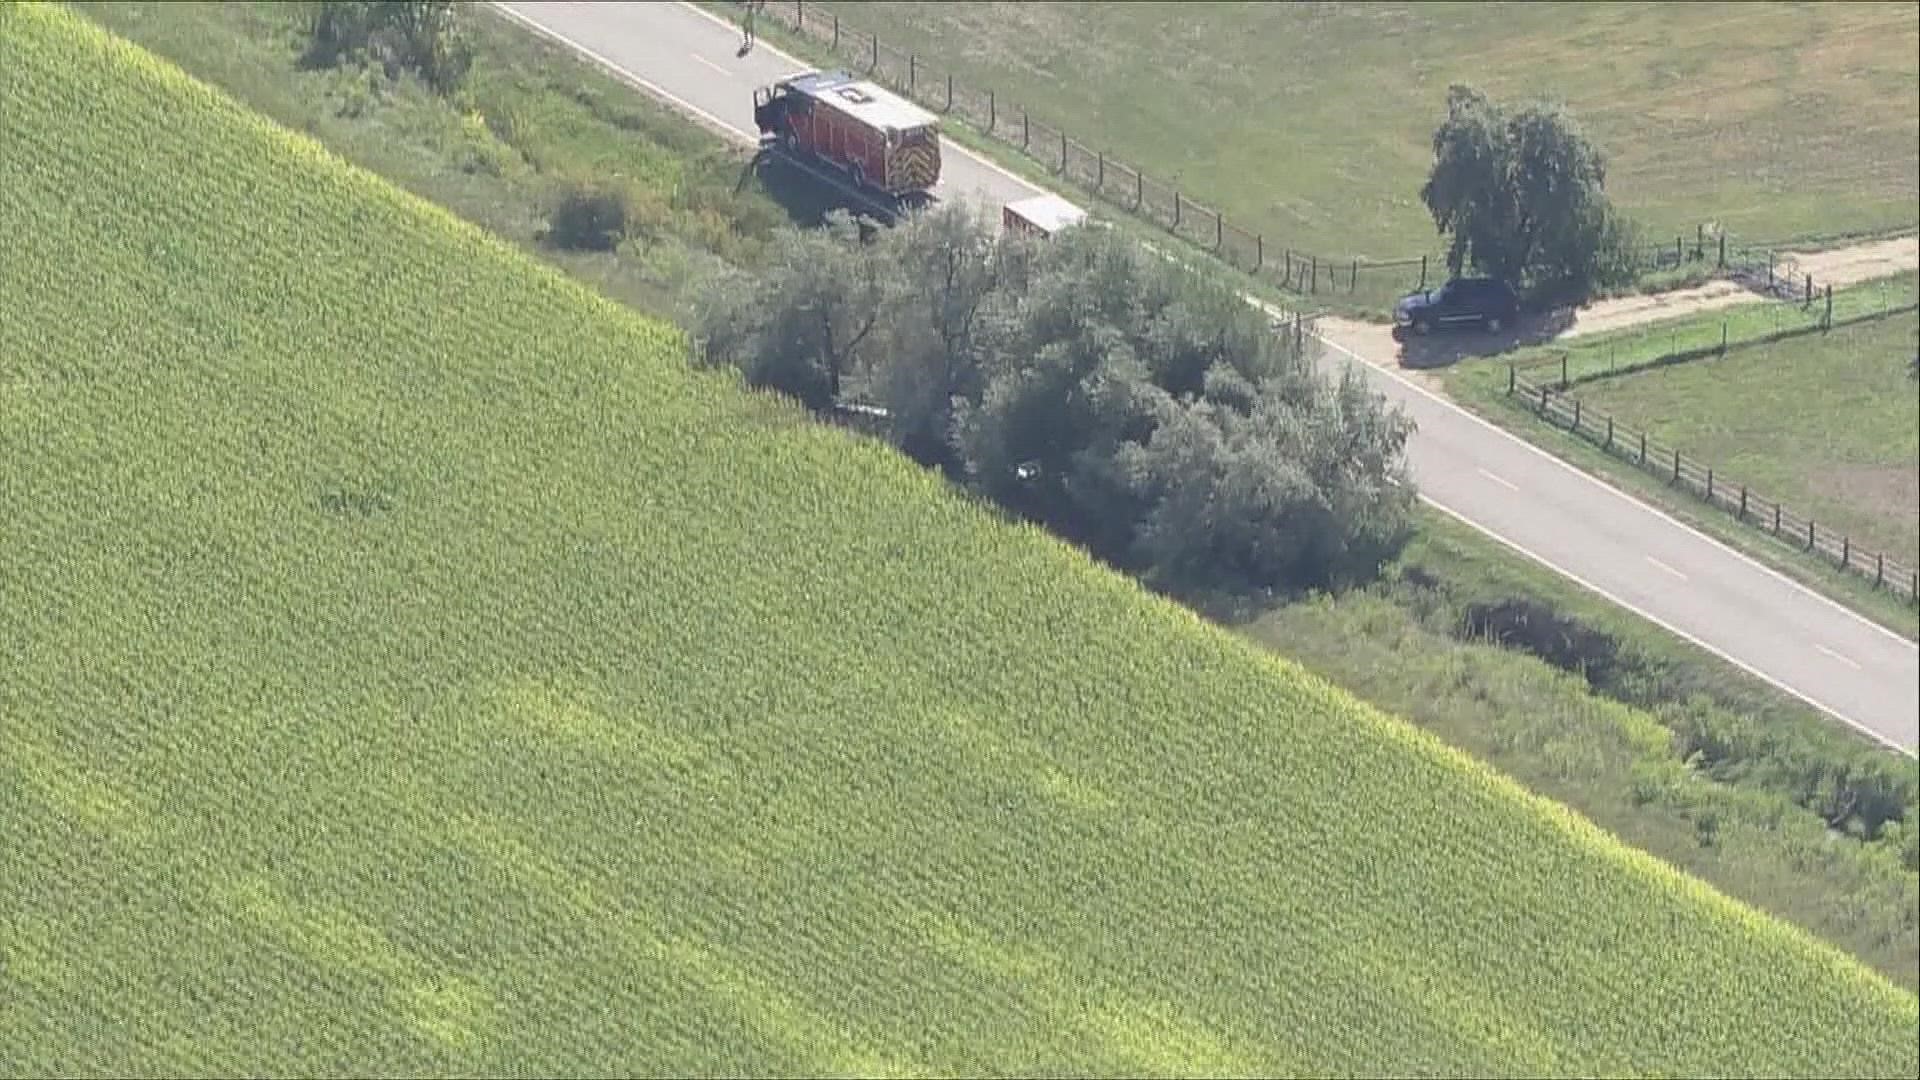 Footage from Sky9 shows the second downed plane in a tree.